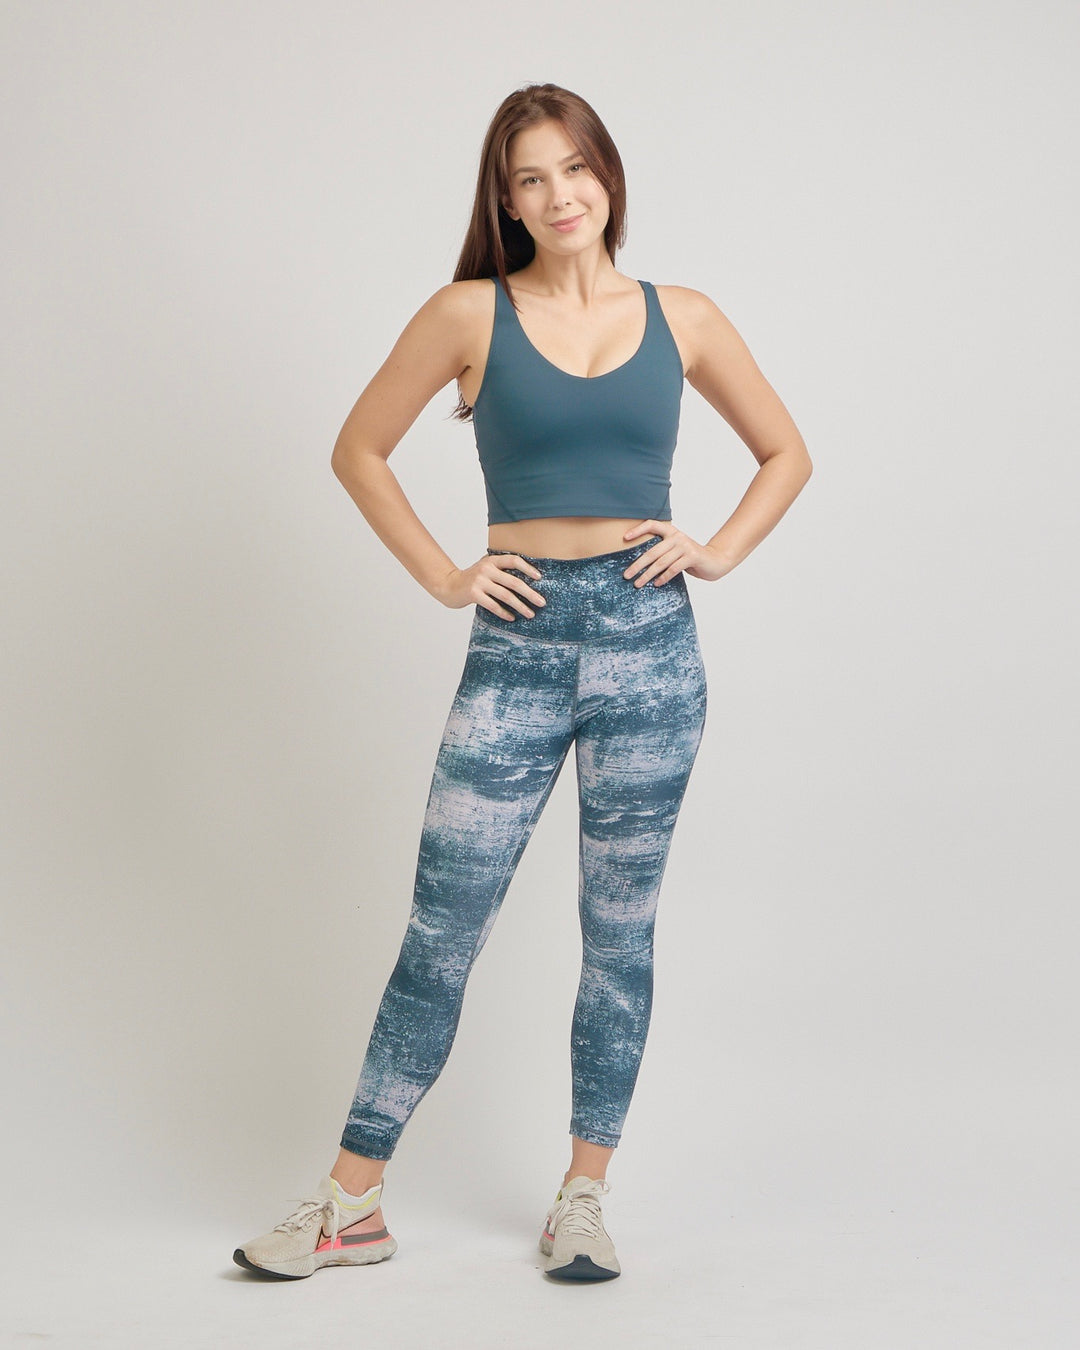 Easy Stretch 23" *Galaxy Print Leggings (only XS left)